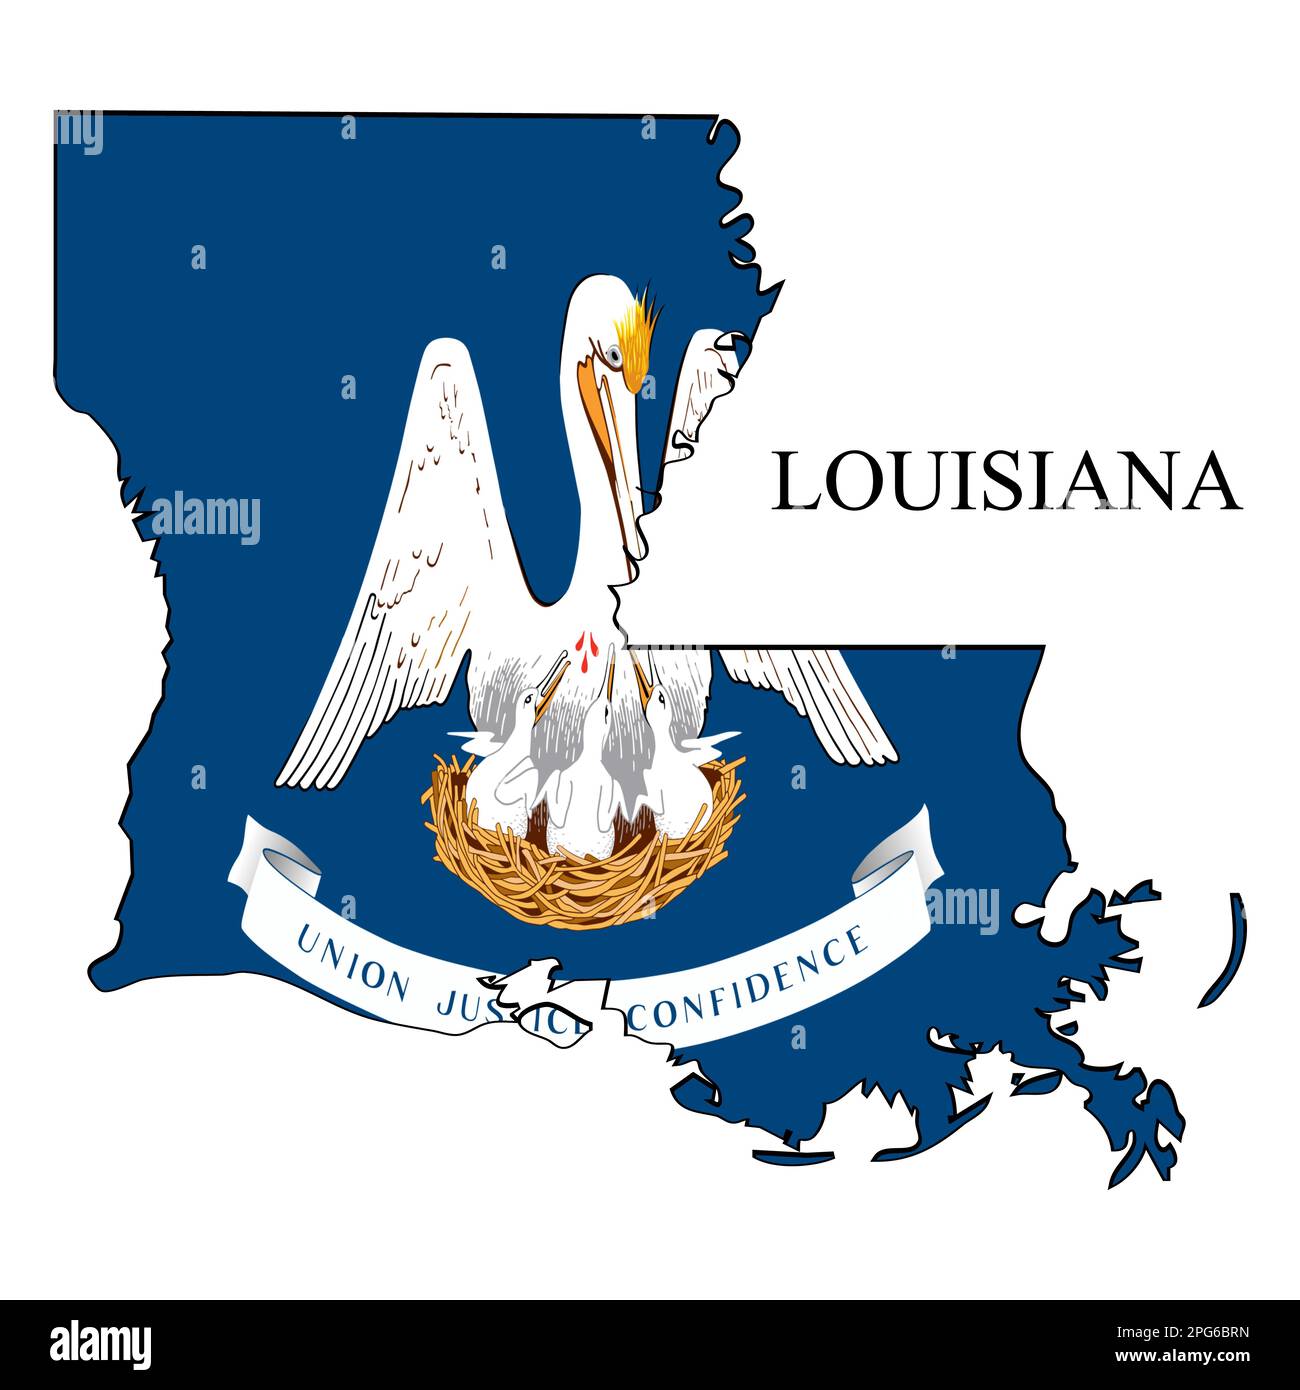 USA and Louisiana State Flag with a vintage and old look Stock Illustration